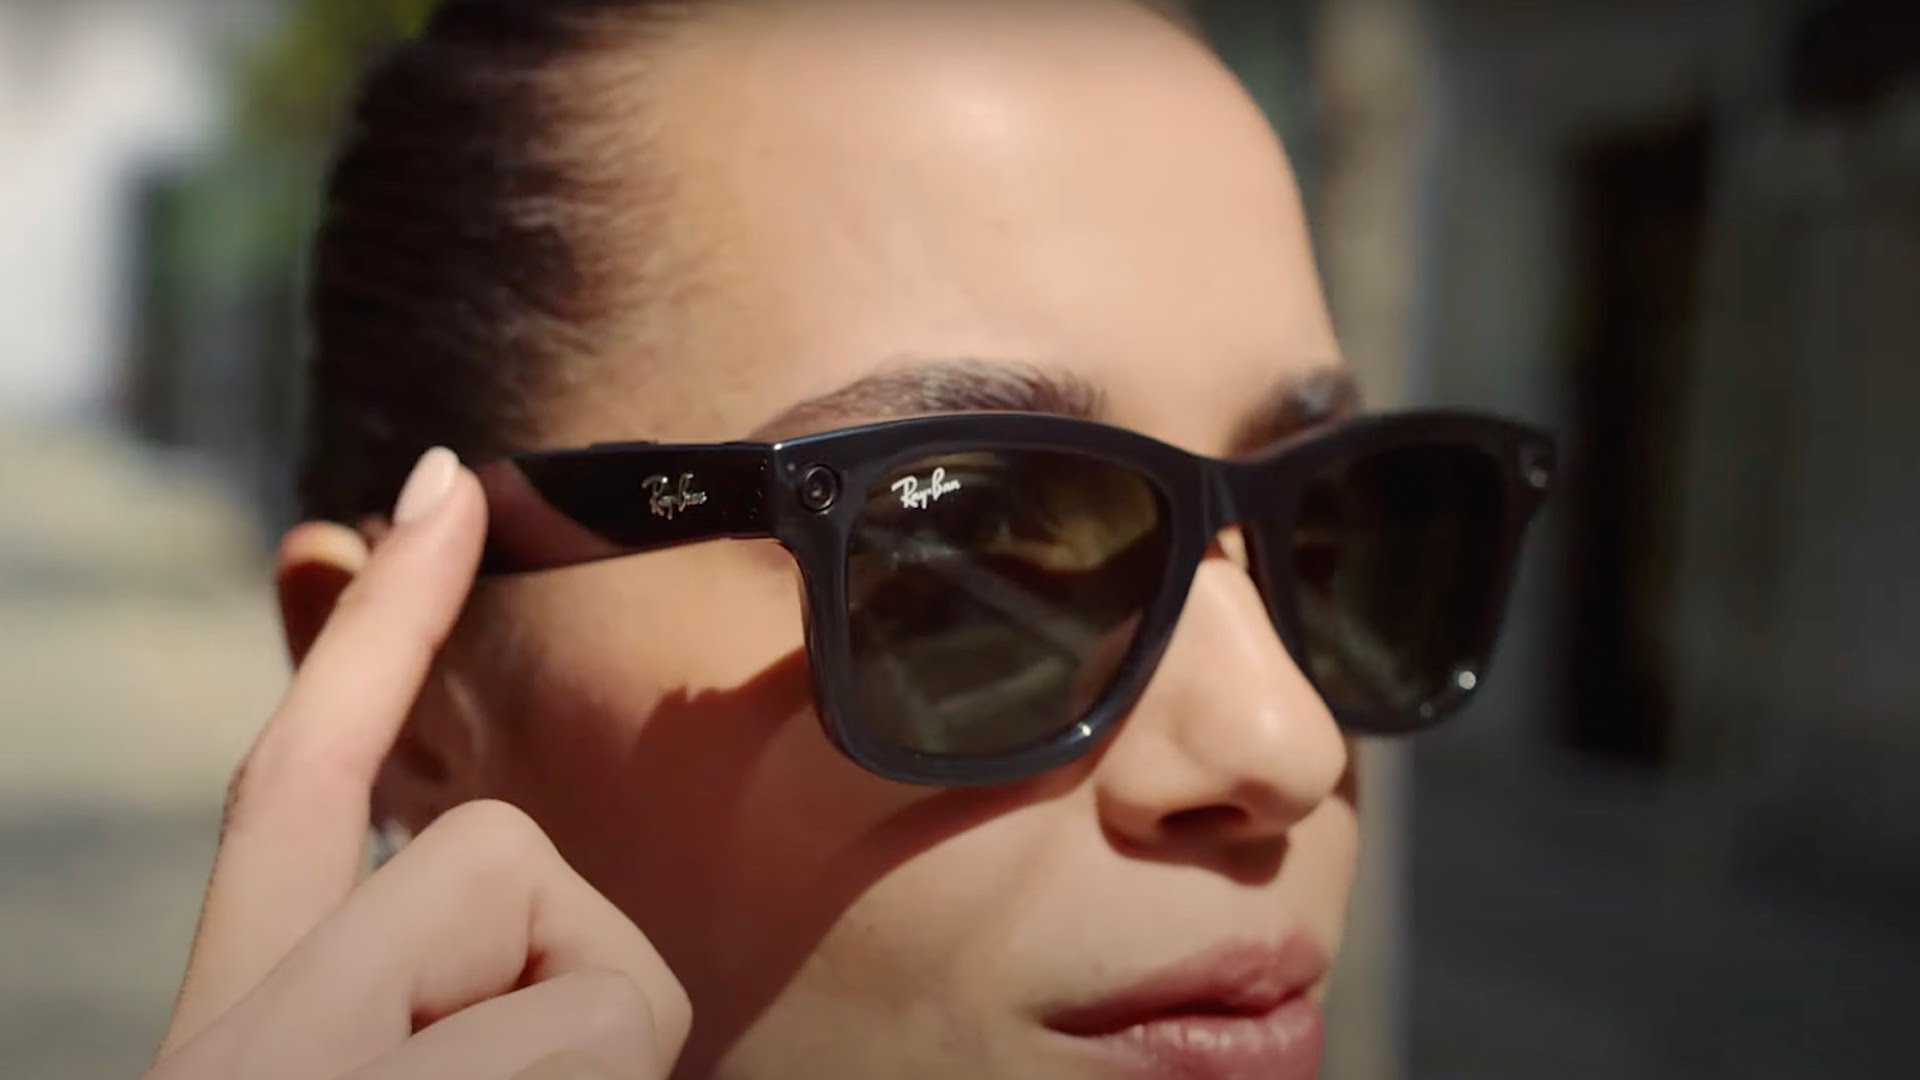 Packed with technology: How Meta’s Ray-Ban smart glasses were created